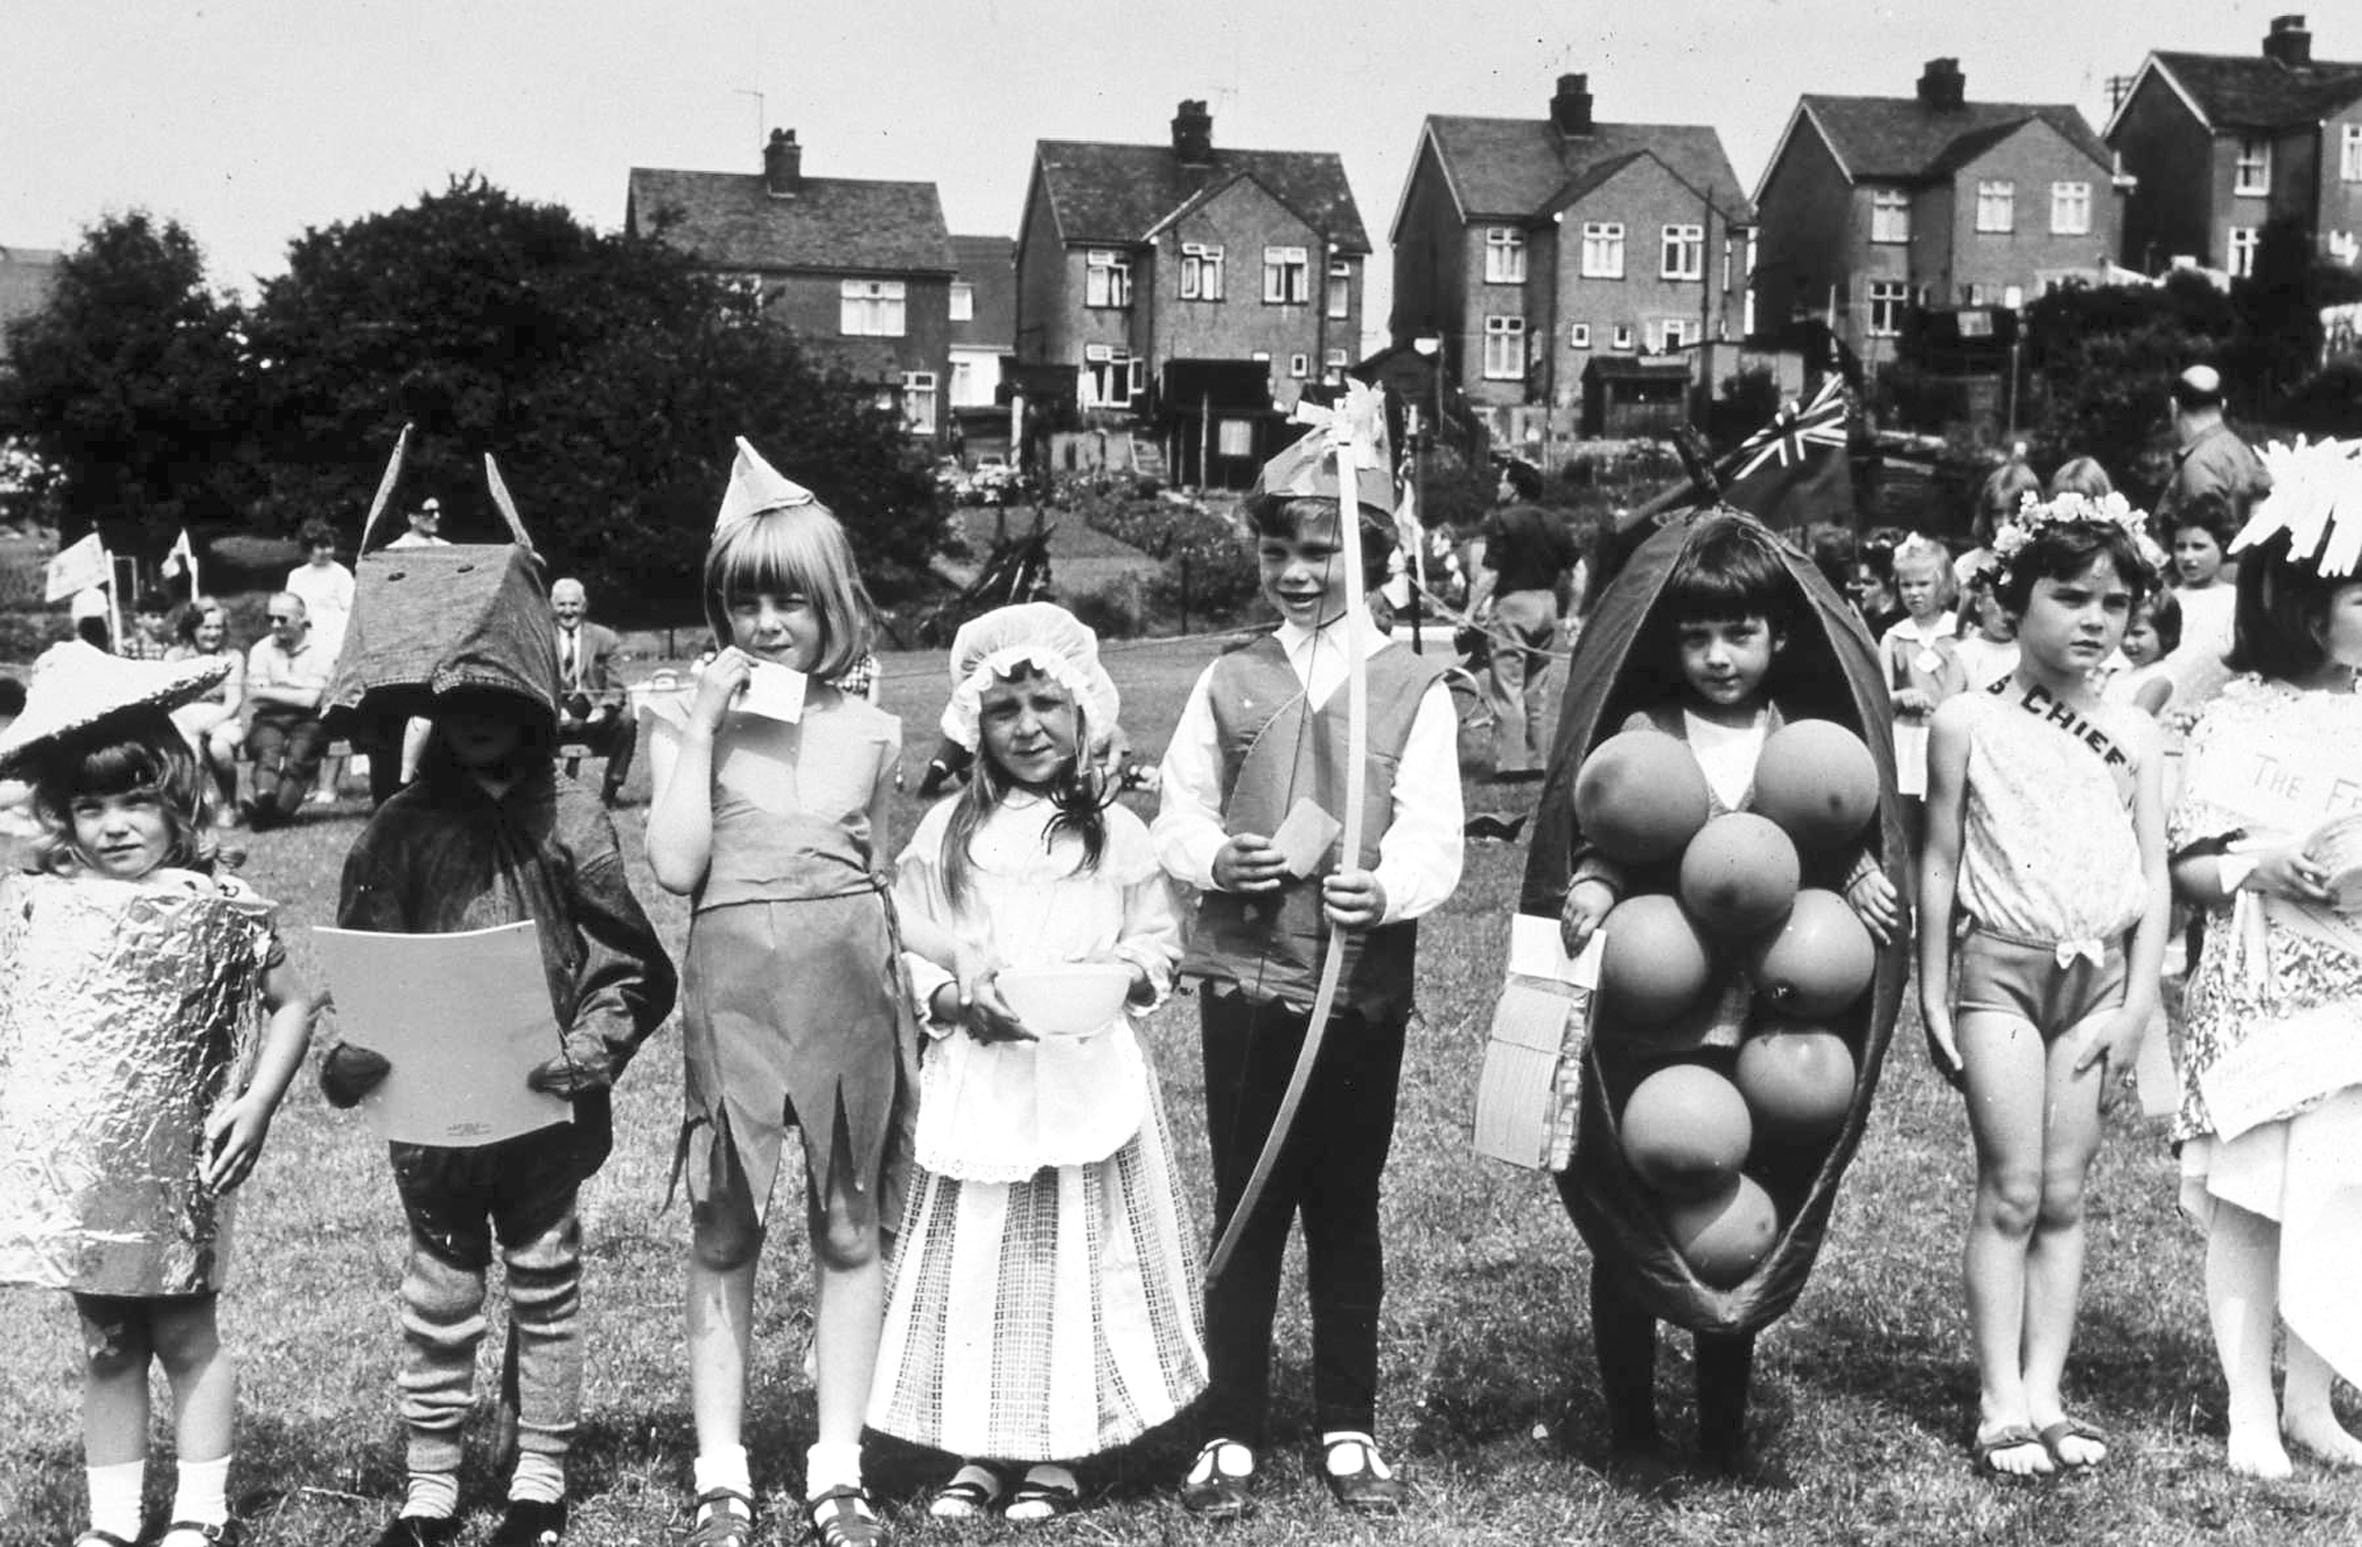 In costumes - Love Lane School pupils at an annual school fete in 1963